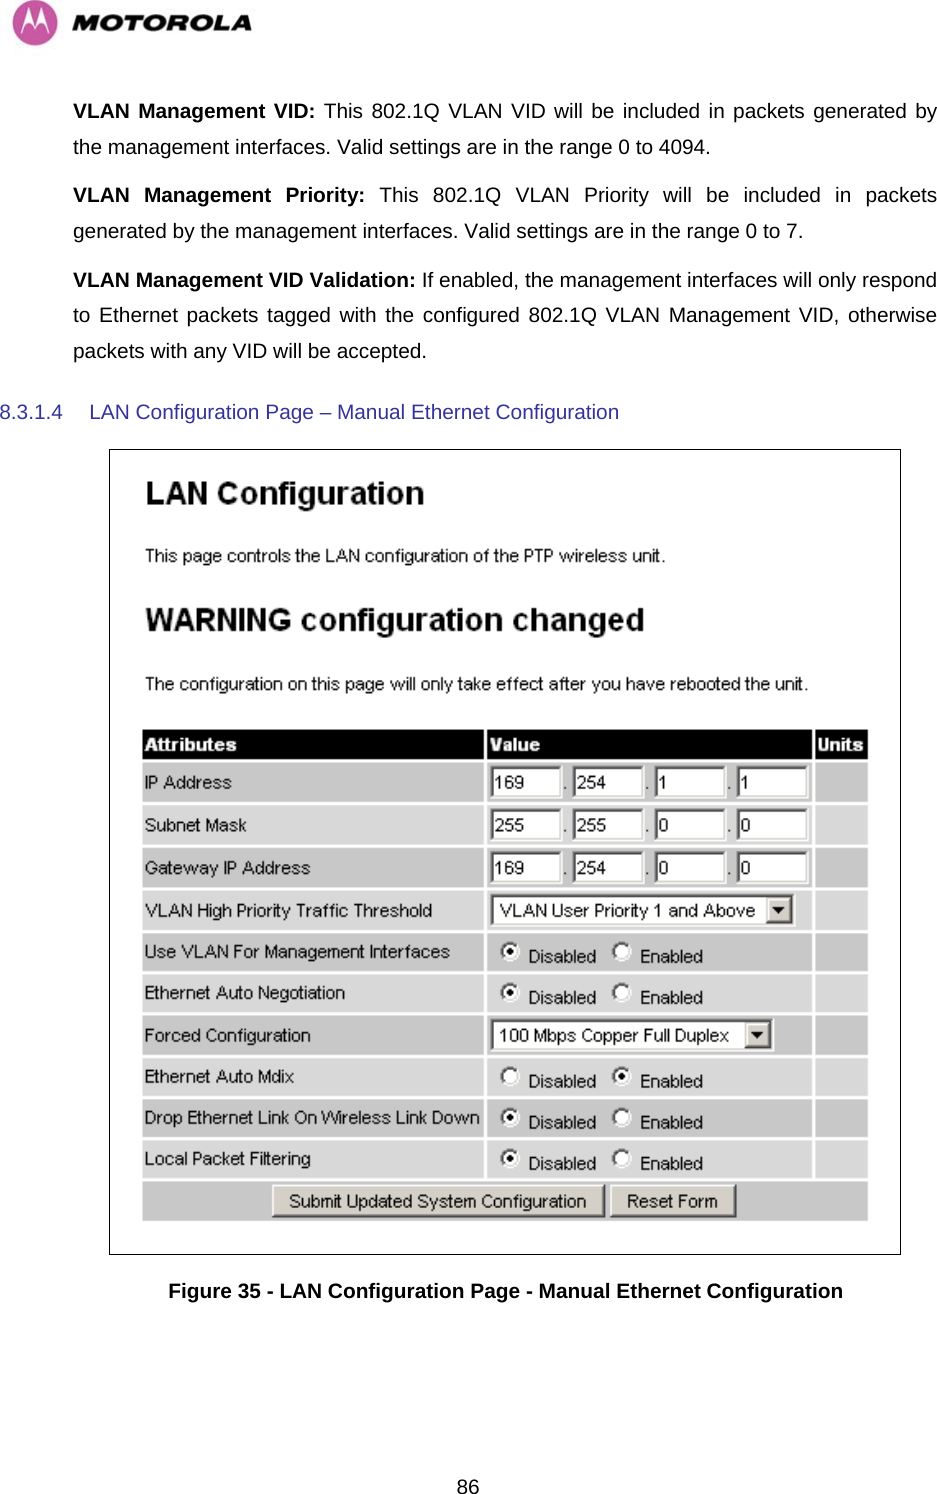   86VLAN Management VID: This 802.1Q VLAN VID will be included in packets generated by the management interfaces. Valid settings are in the range 0 to 4094. VLAN Management Priority: This 802.1Q VLAN Priority will be included in packets generated by the management interfaces. Valid settings are in the range 0 to 7. VLAN Management VID Validation: If enabled, the management interfaces will only respond to Ethernet packets tagged with the configured 802.1Q VLAN Management VID, otherwise packets with any VID will be accepted. 8.3.1.4  LAN Configuration Page – Manual Ethernet Configuration  Figure 35 - LAN Configuration Page - Manual Ethernet Configuration 